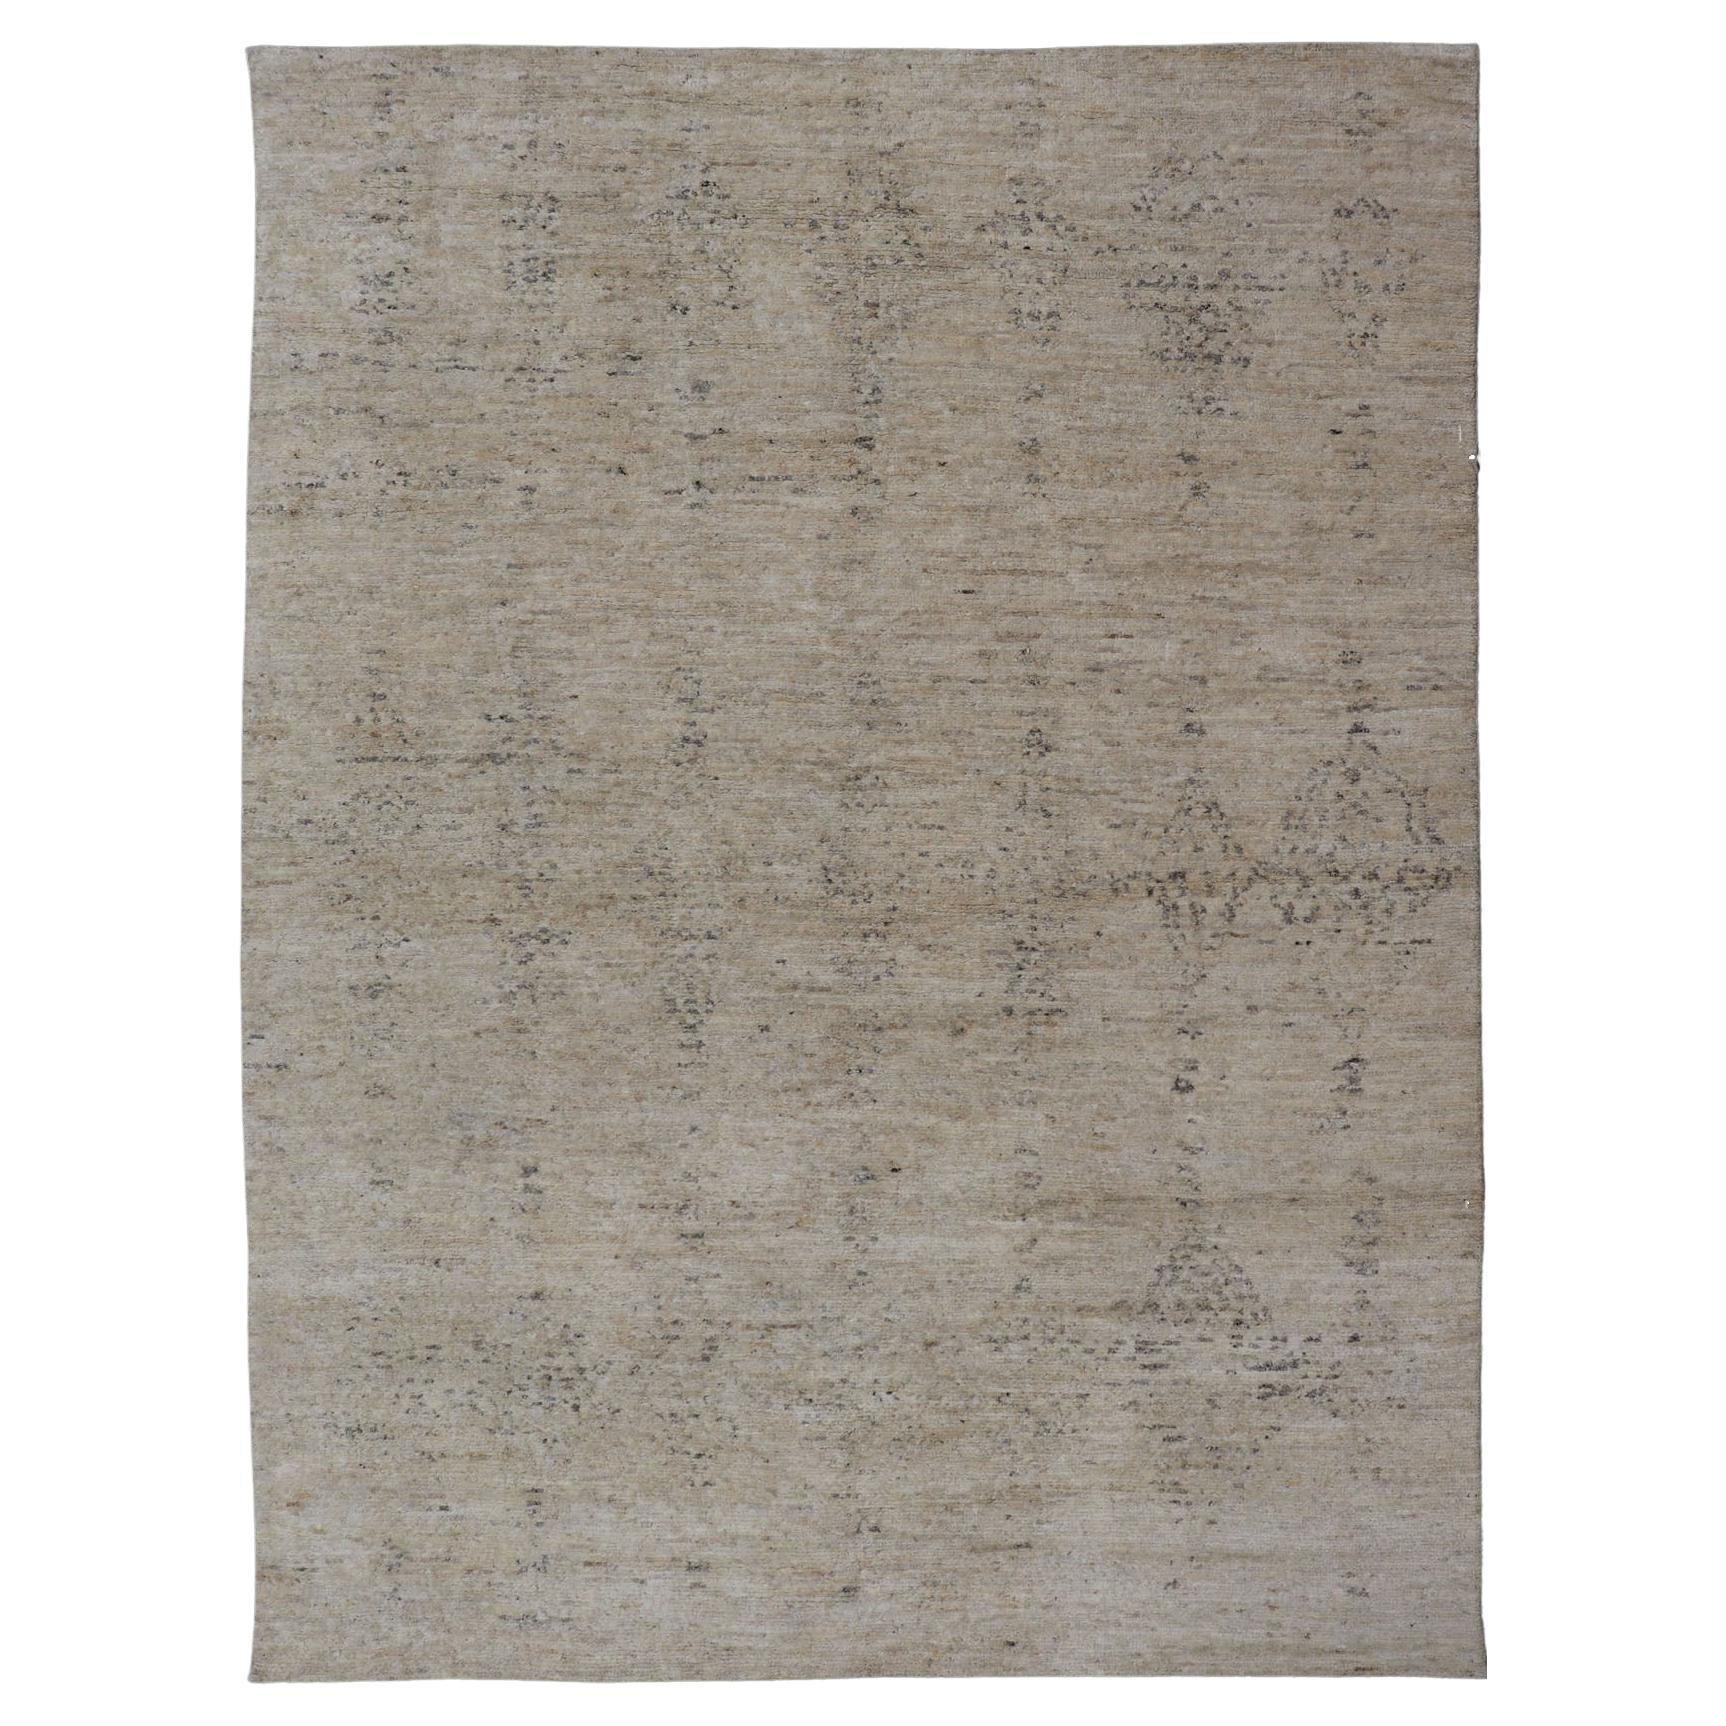 Large Modern Moroccan Style Rug in All-Neutral Tones, Beige, Cream, and Gray